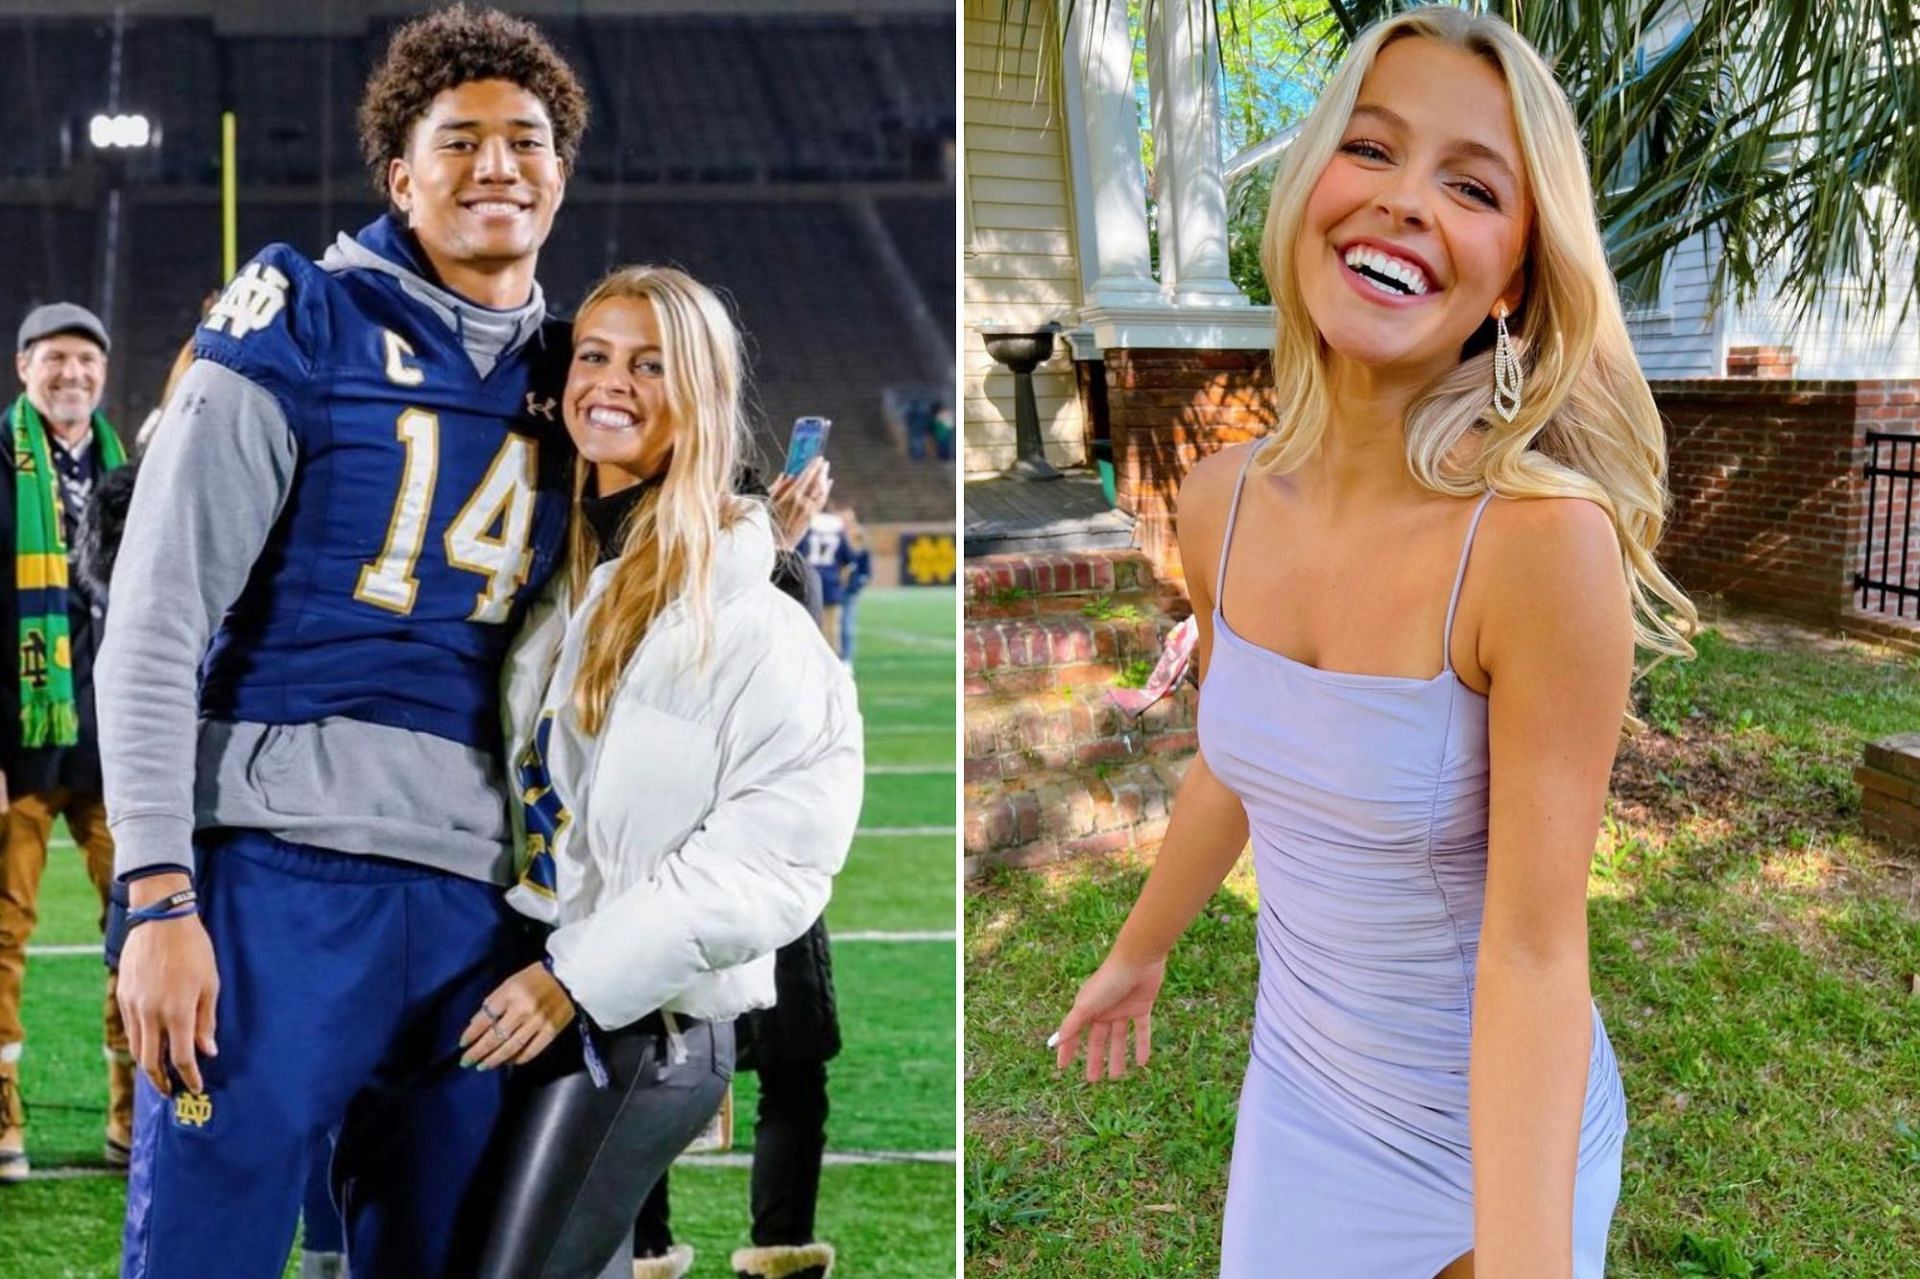 NFL draft prospect Kyle Hamilton and girlfriend Reese Damm put on a show